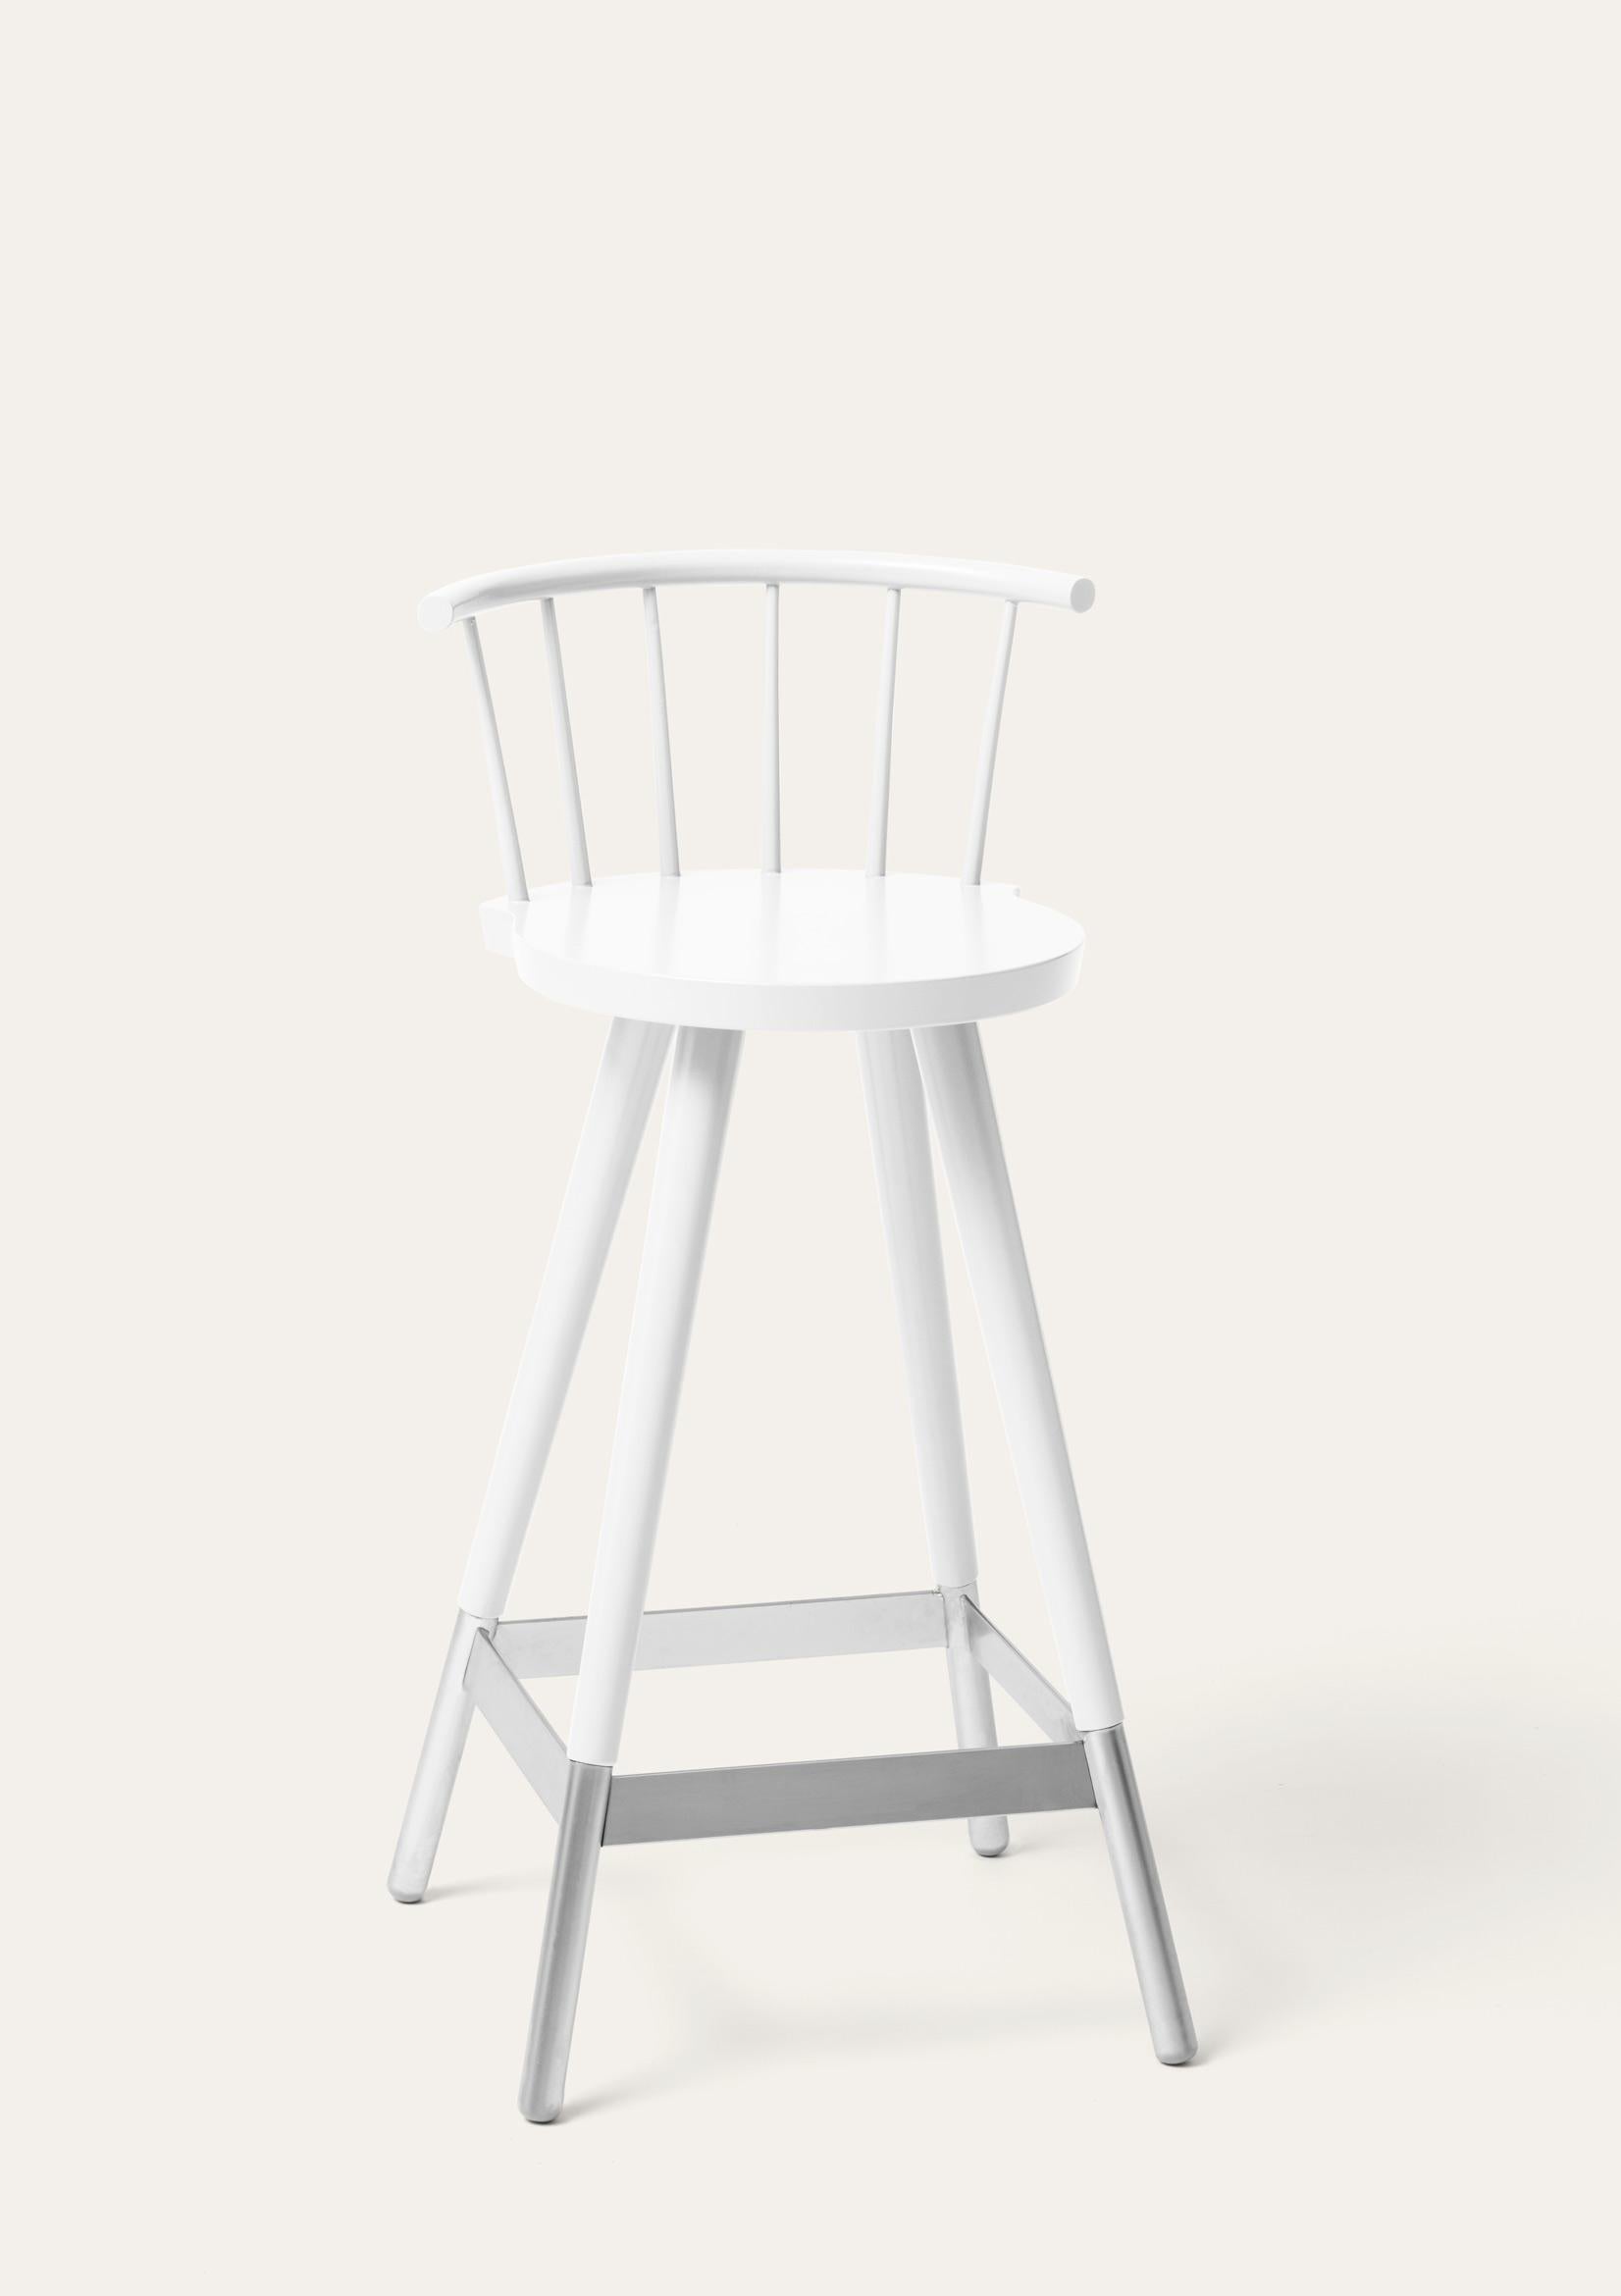 White Tupp barstool by Storängen Design
Dimensions: D 41 x W 41 x H 85 x SH 65 cm
Materials: birch wood, nickel plated steel.
Also available in other colors.

Give the bar some character! Tupp is avaliable in two heights, both with and without